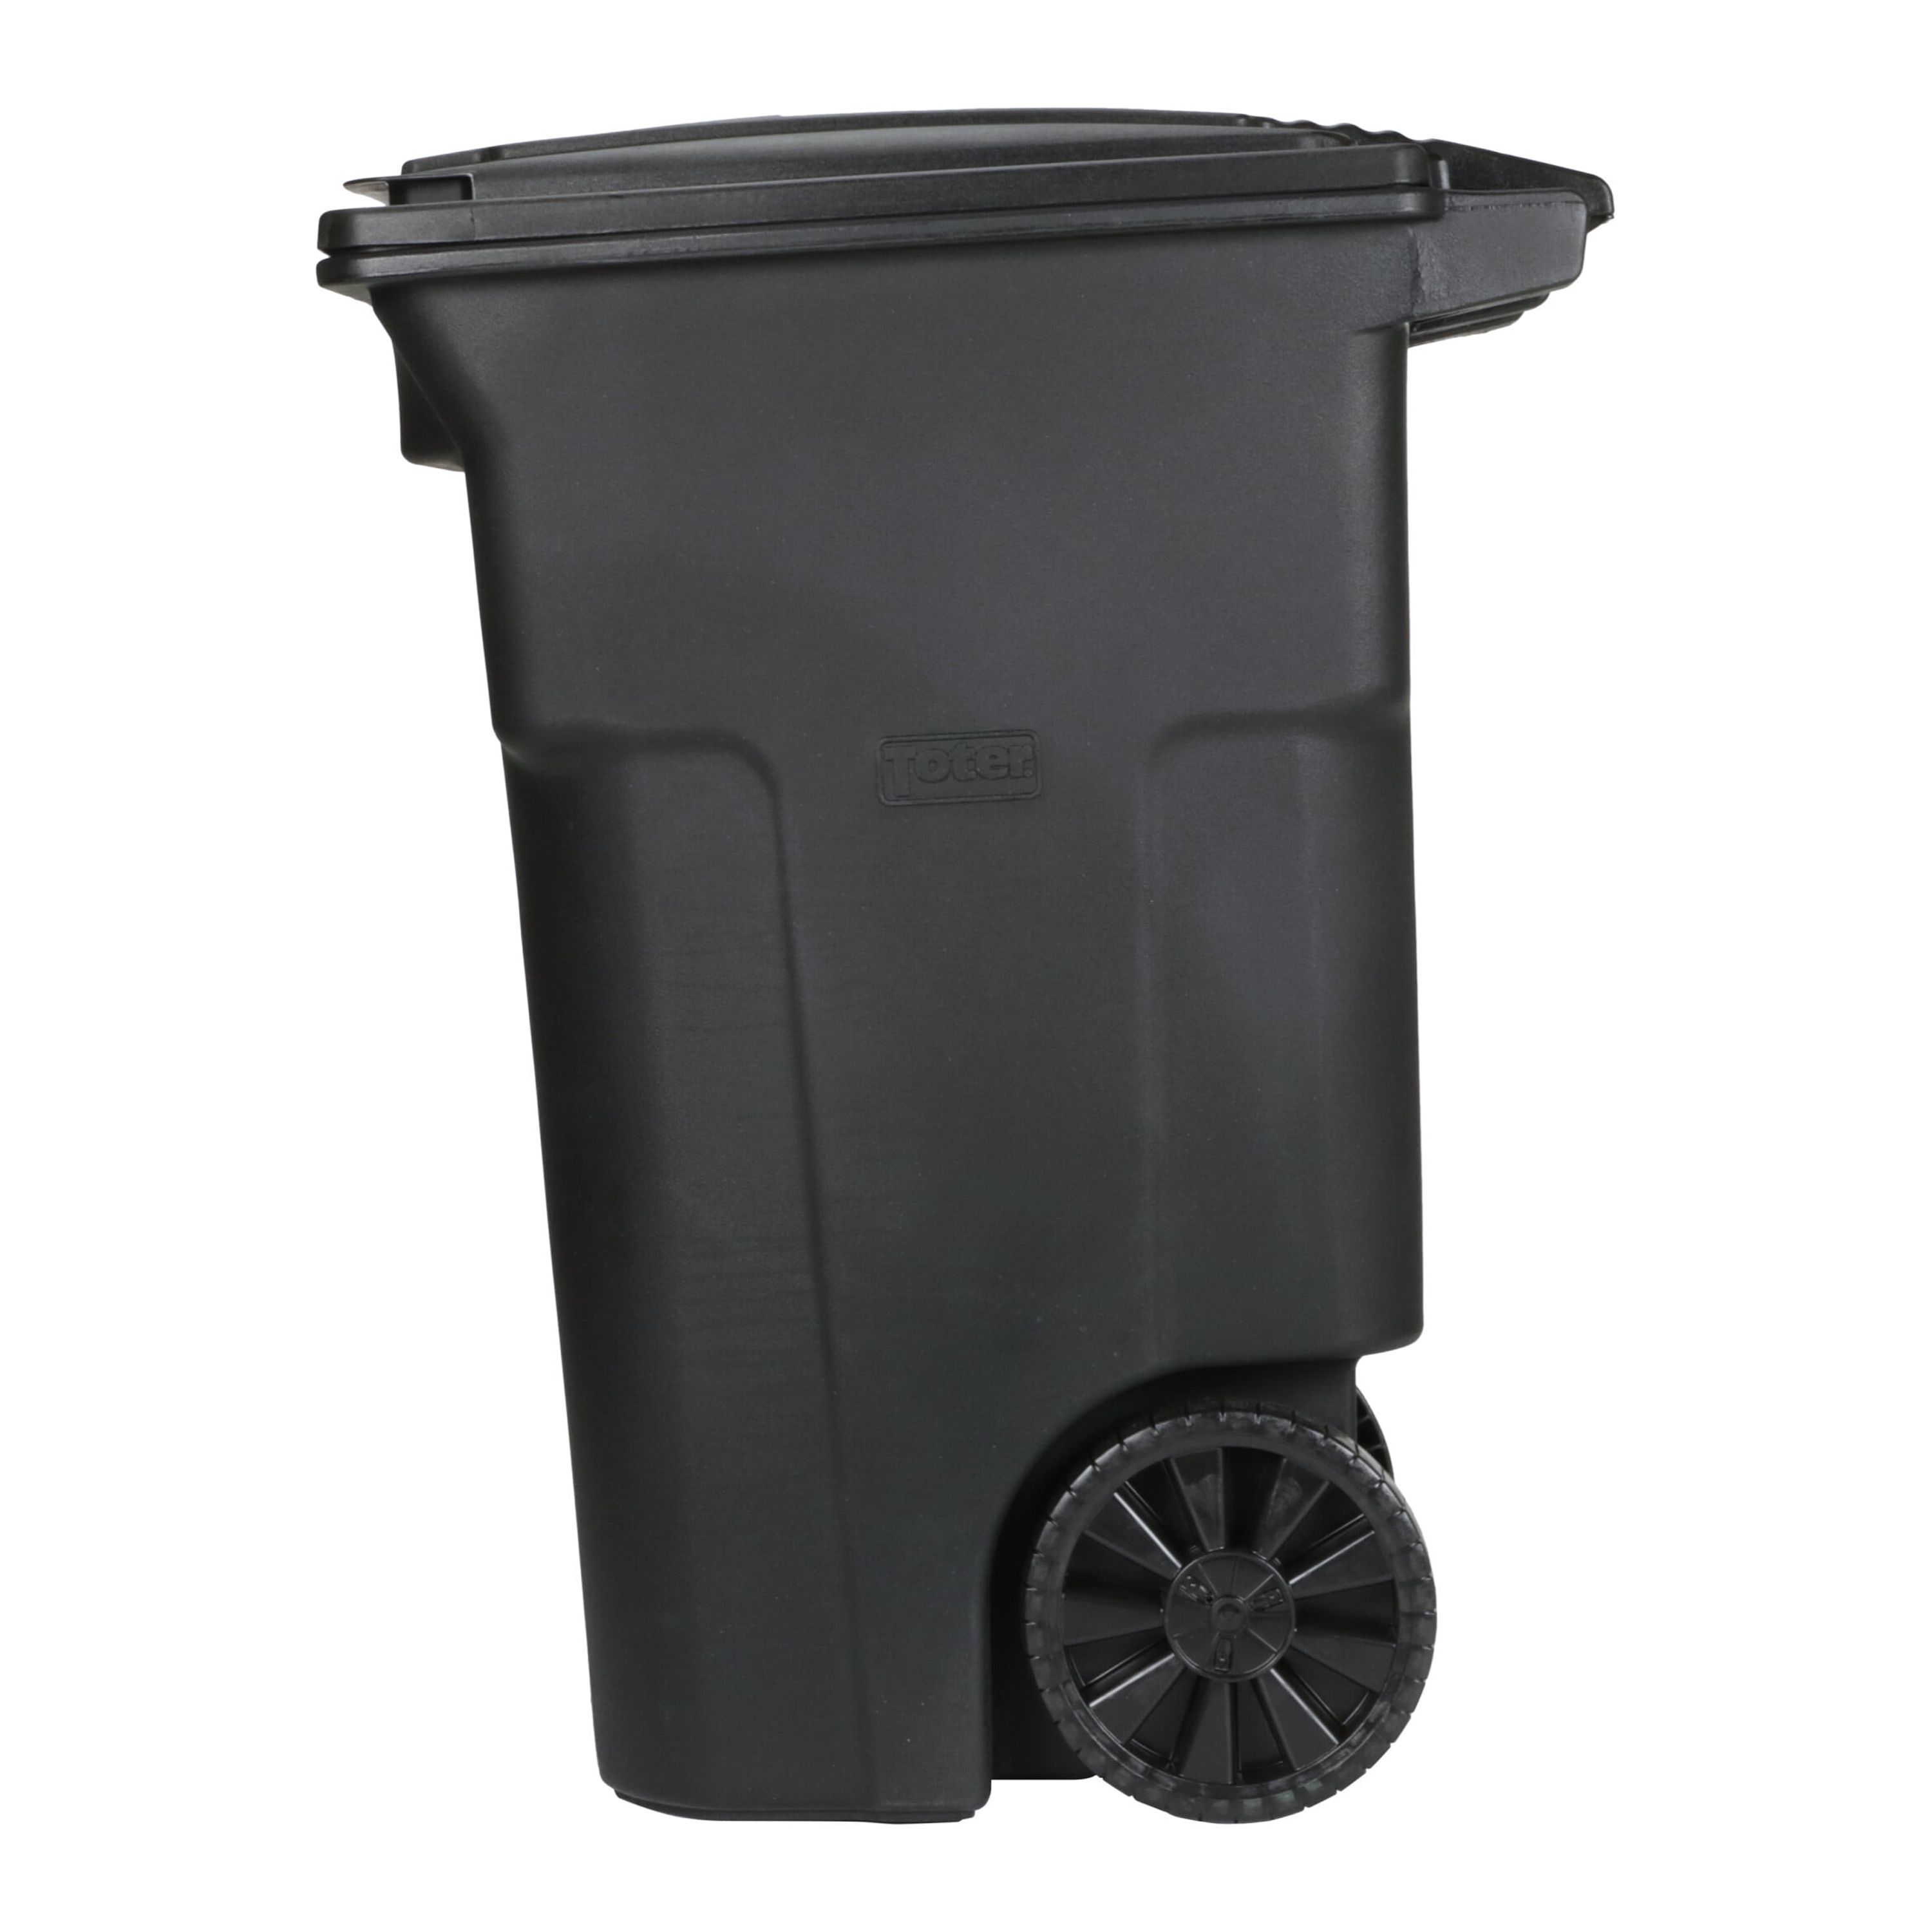 Toter 64 gallon black garbage can with wheels and lid - image 5 of 7